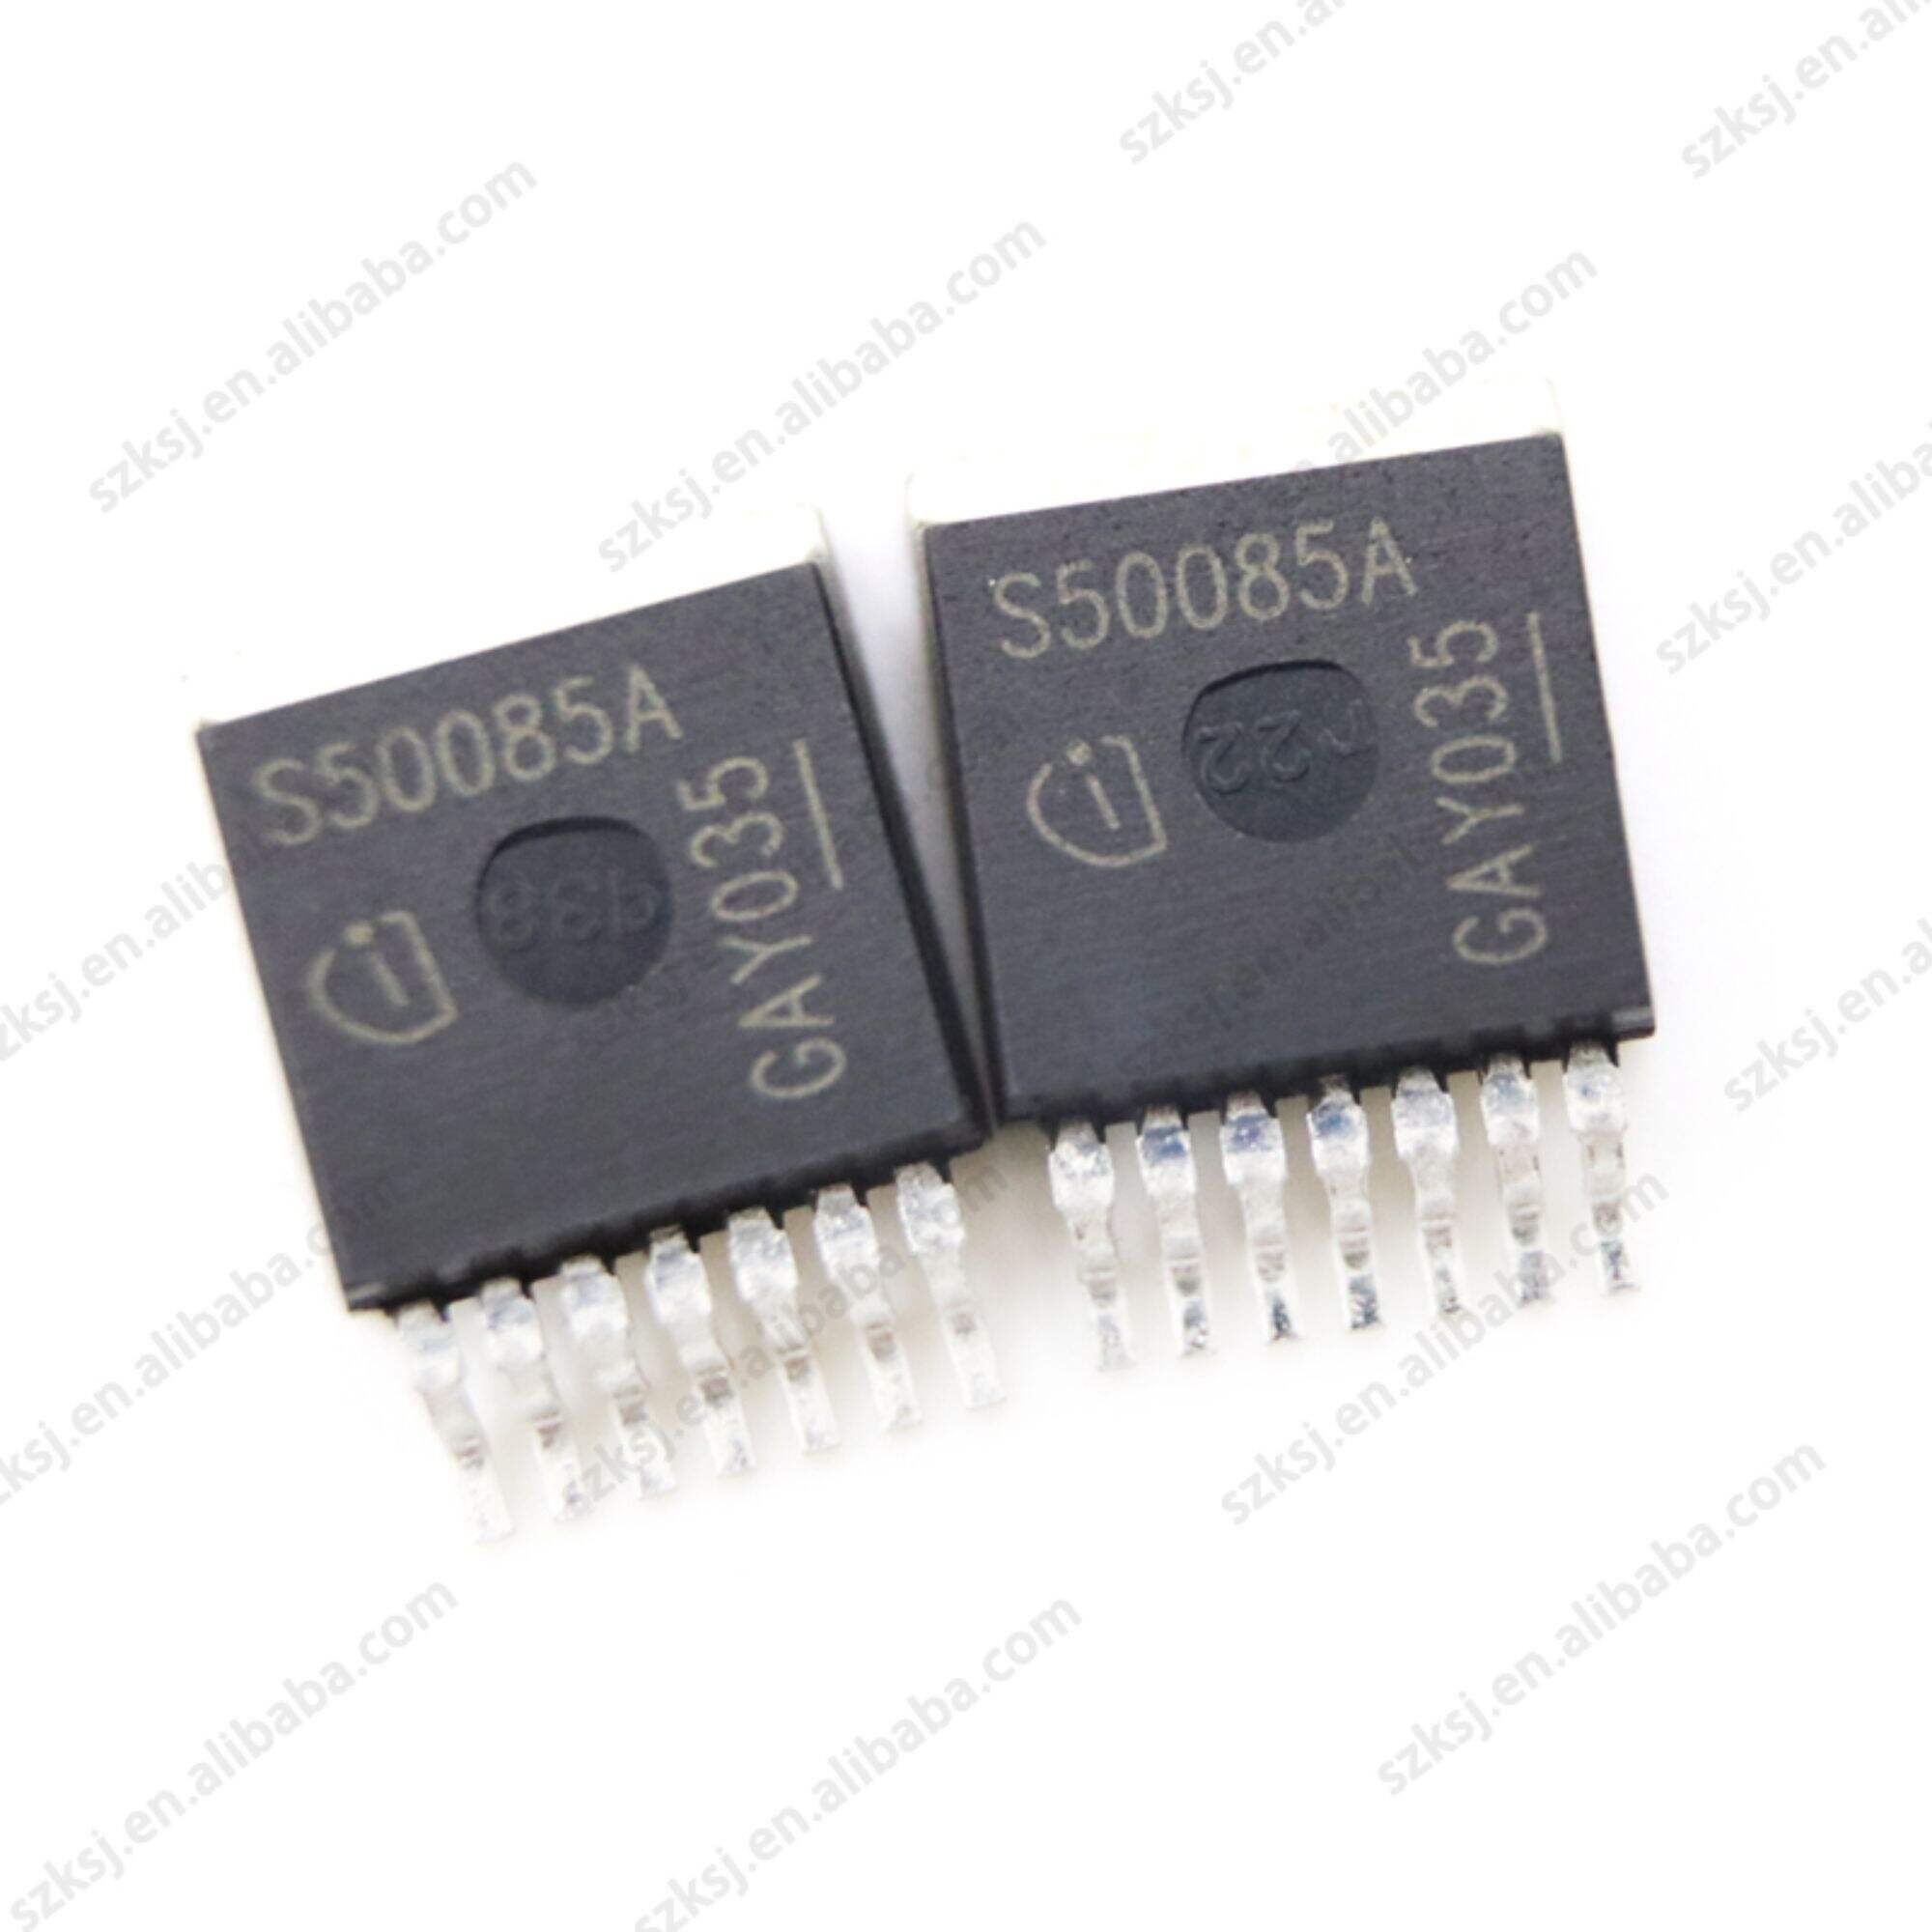 BTS500851TMAATMA1 BTS50085A New original stock switch drive IC chip PG-TO220-7-4 IC